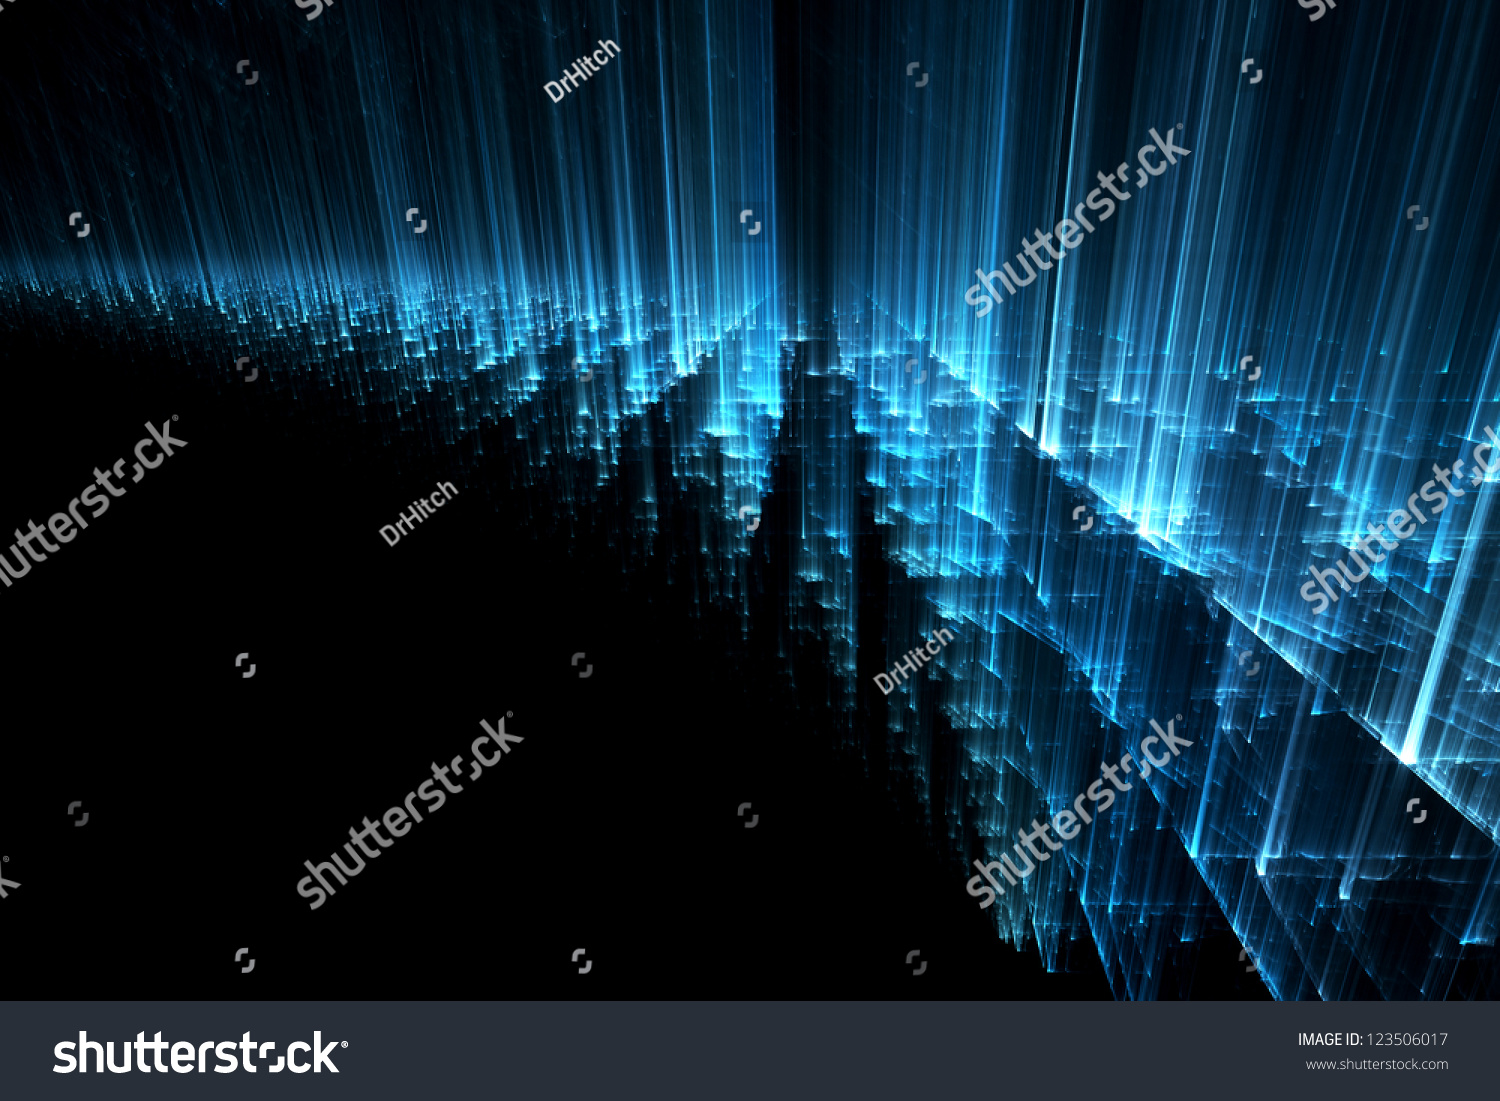 Abstract Science Or Technology Background Stock Photo